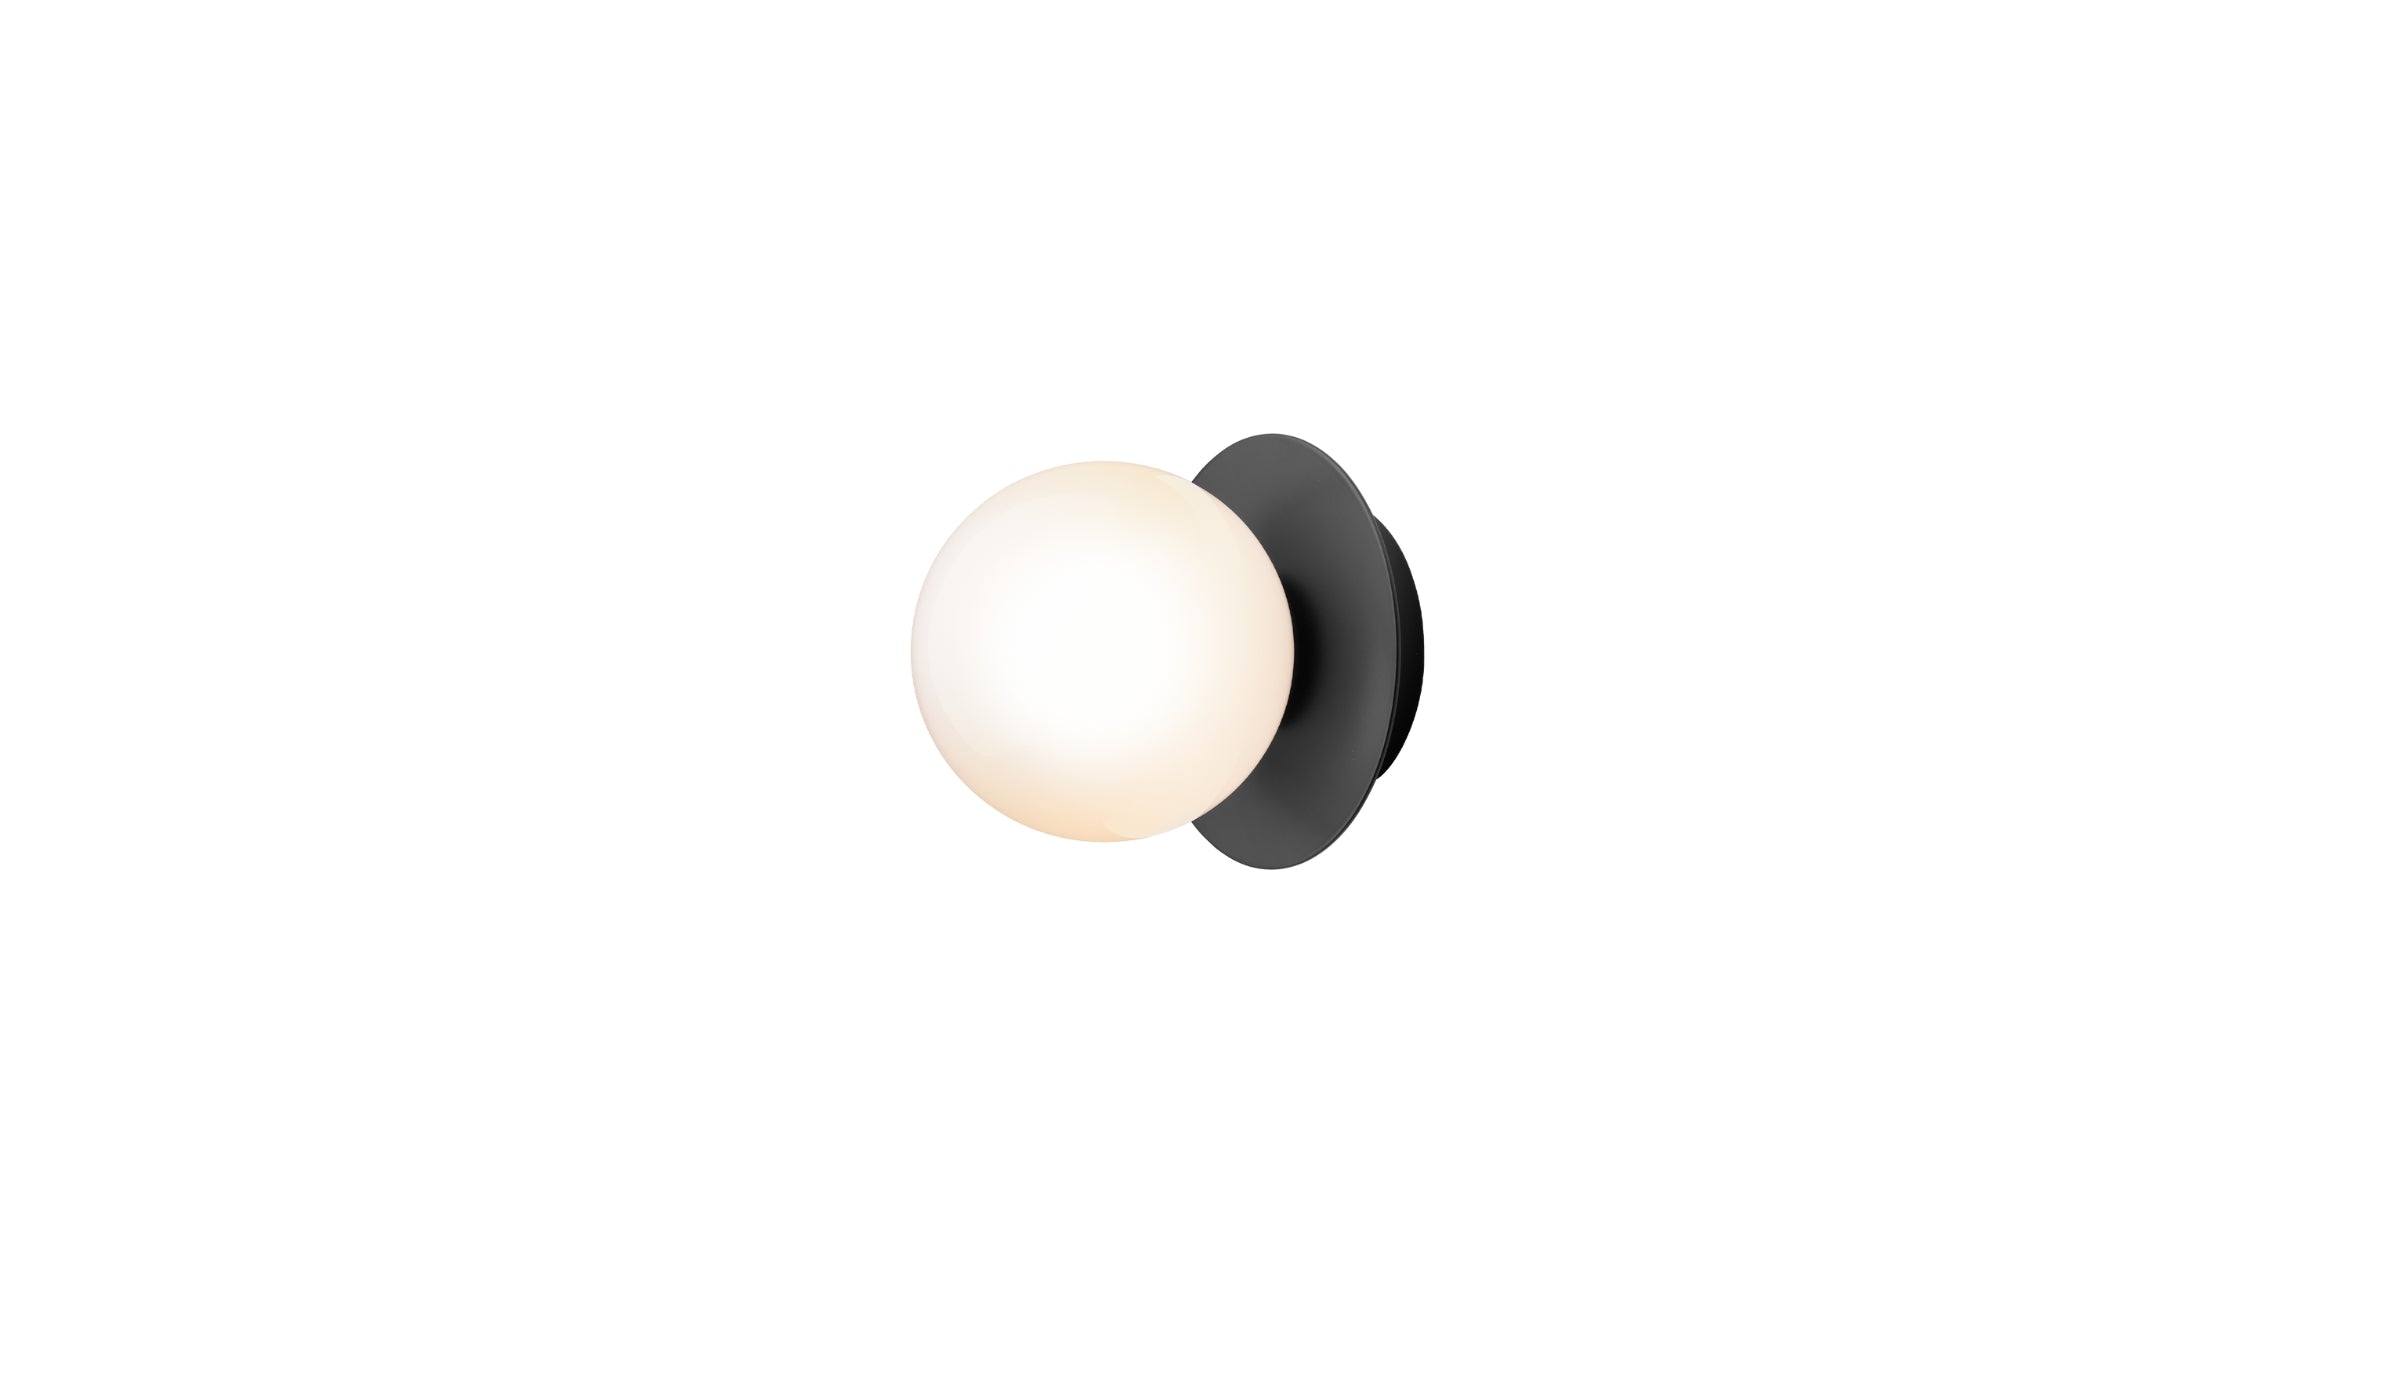 Liila 1 Small - Wall or ceiling light, opal glass lampshade, black